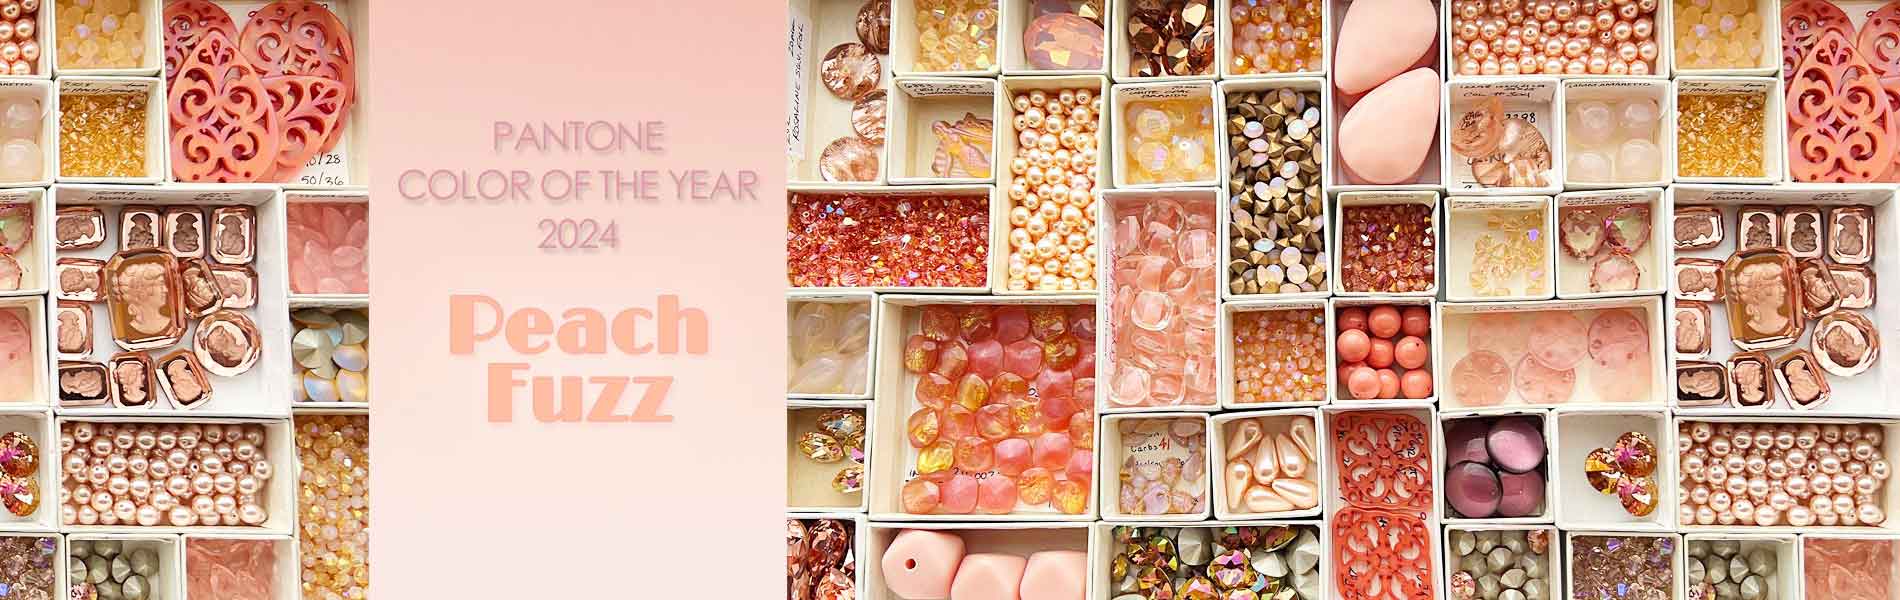 pantone-2024-color-of-the-year-peach-fuzz